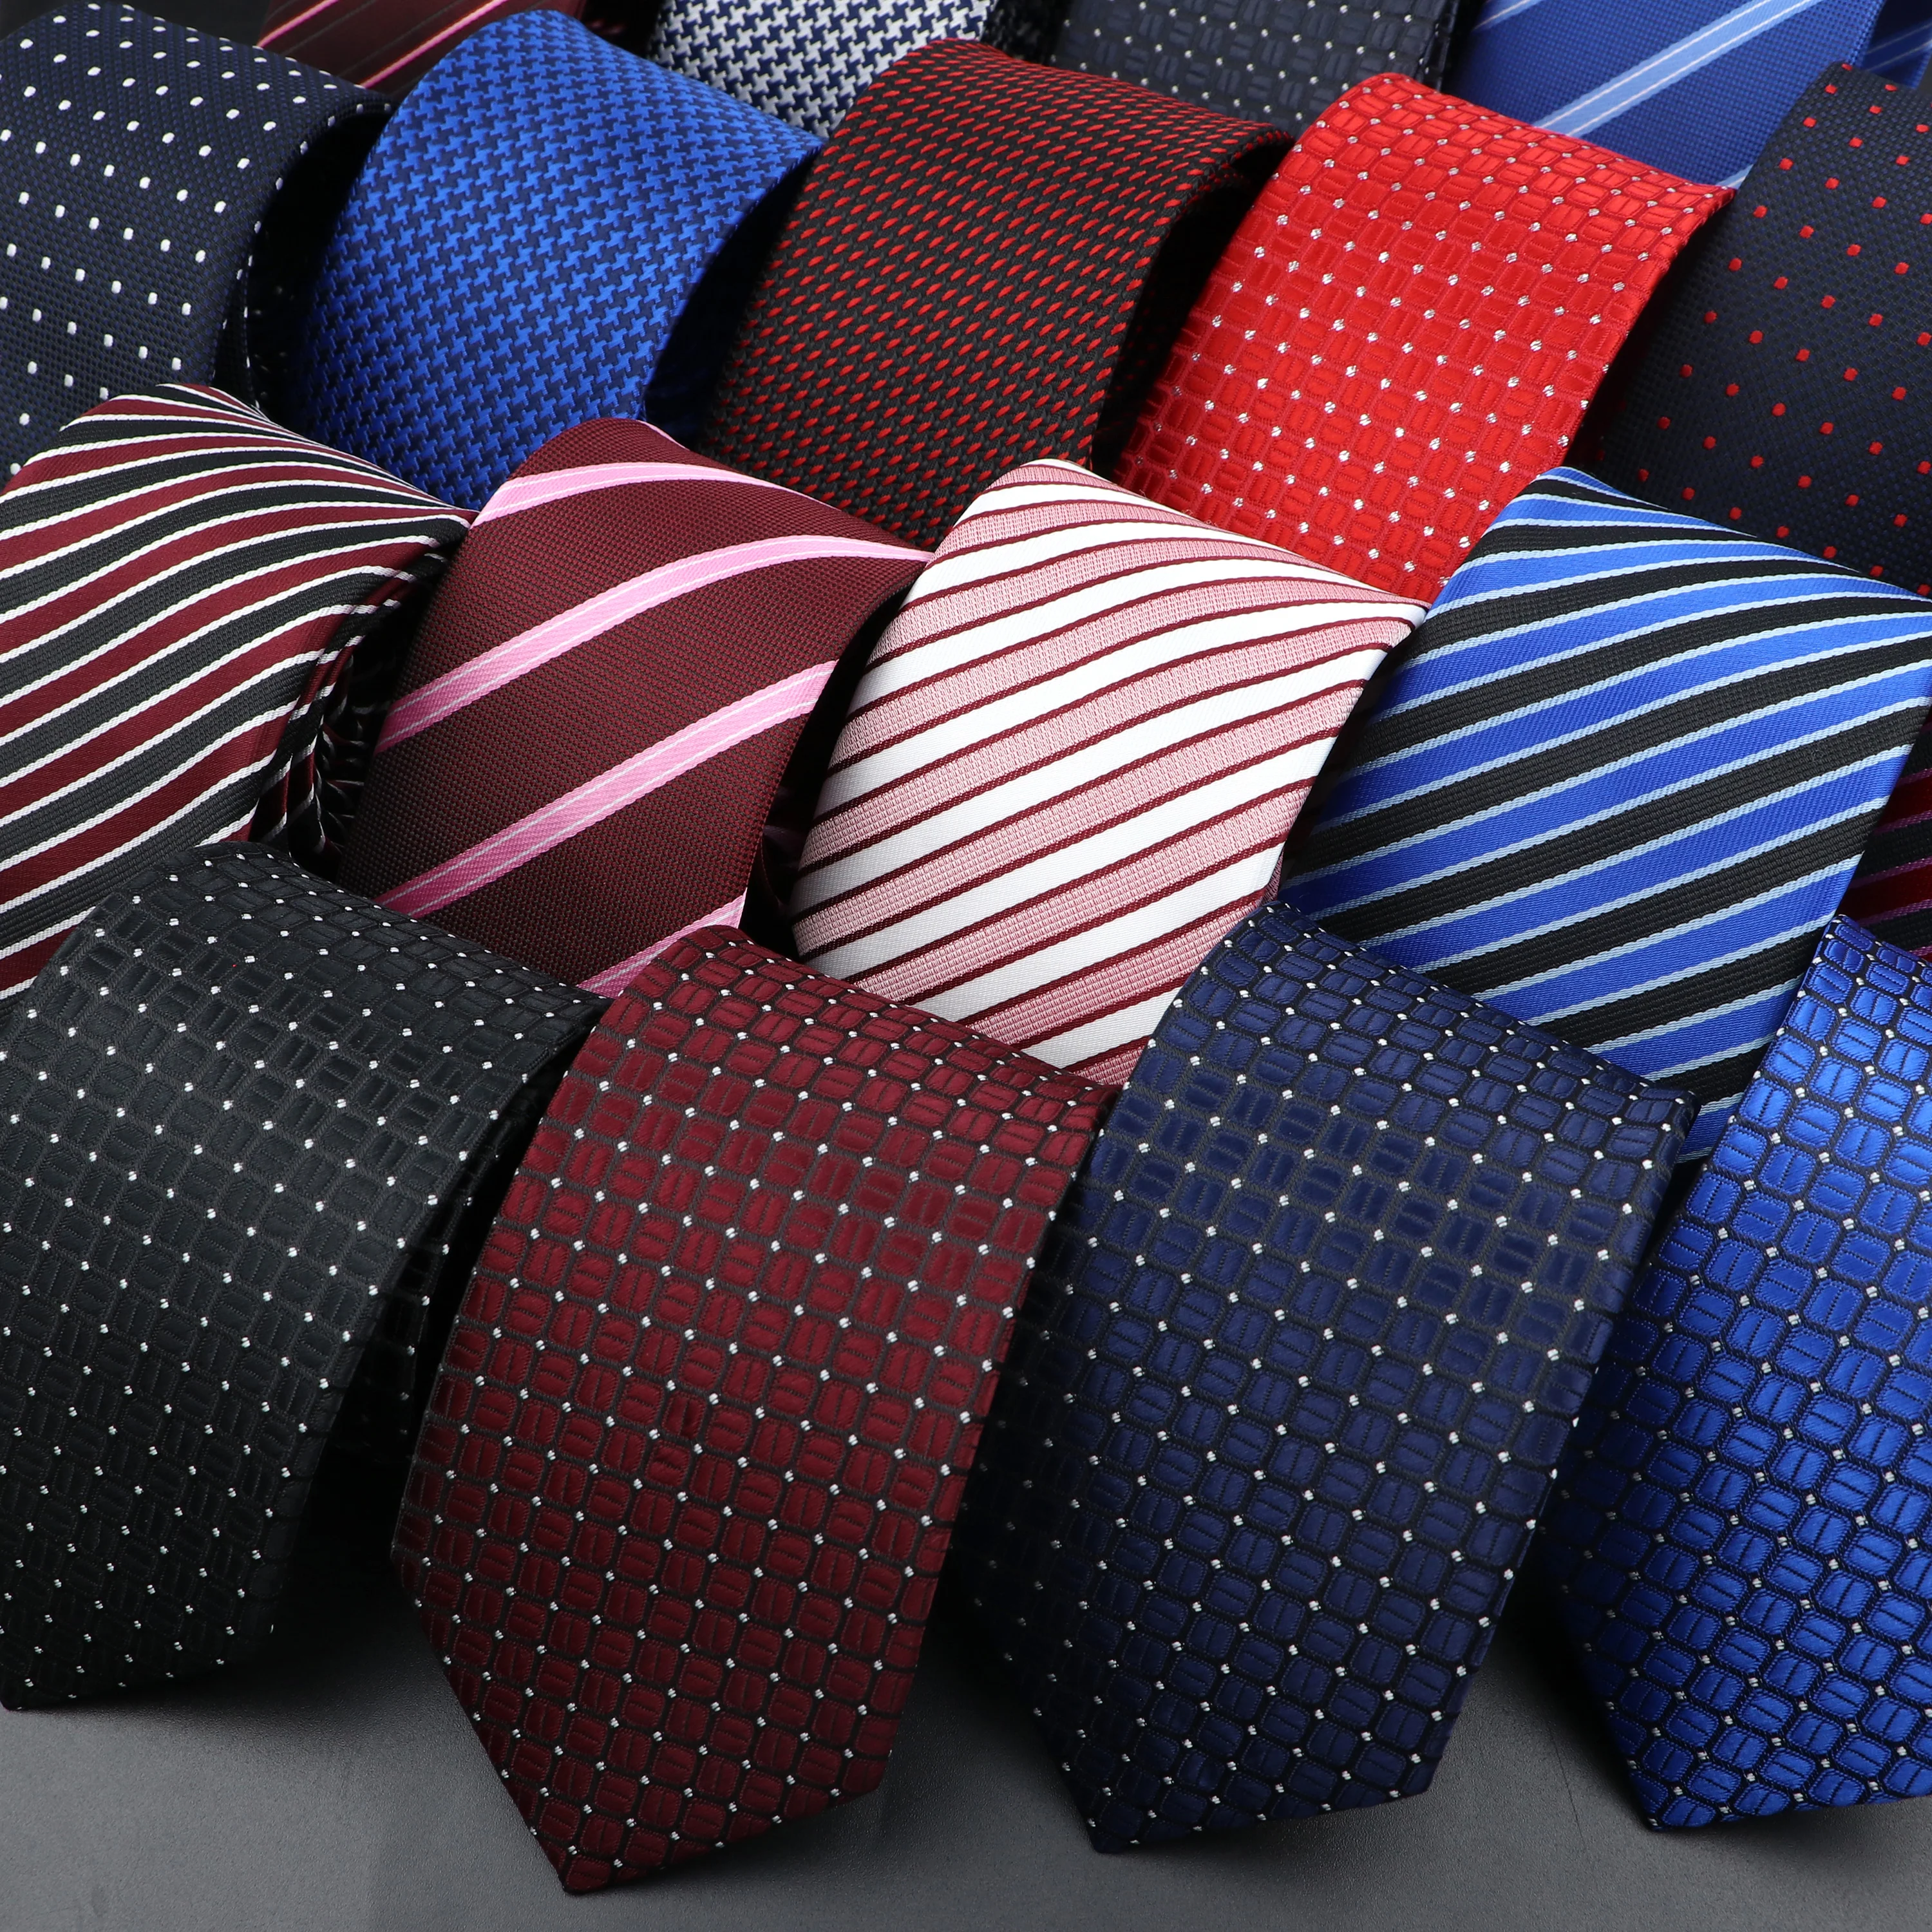 New Dot Striped Men's Tie Fashion Classic Soft Neckties Blue Black Red Pink Jacquard Woven Polyester Cravat Daily Wear Accessory